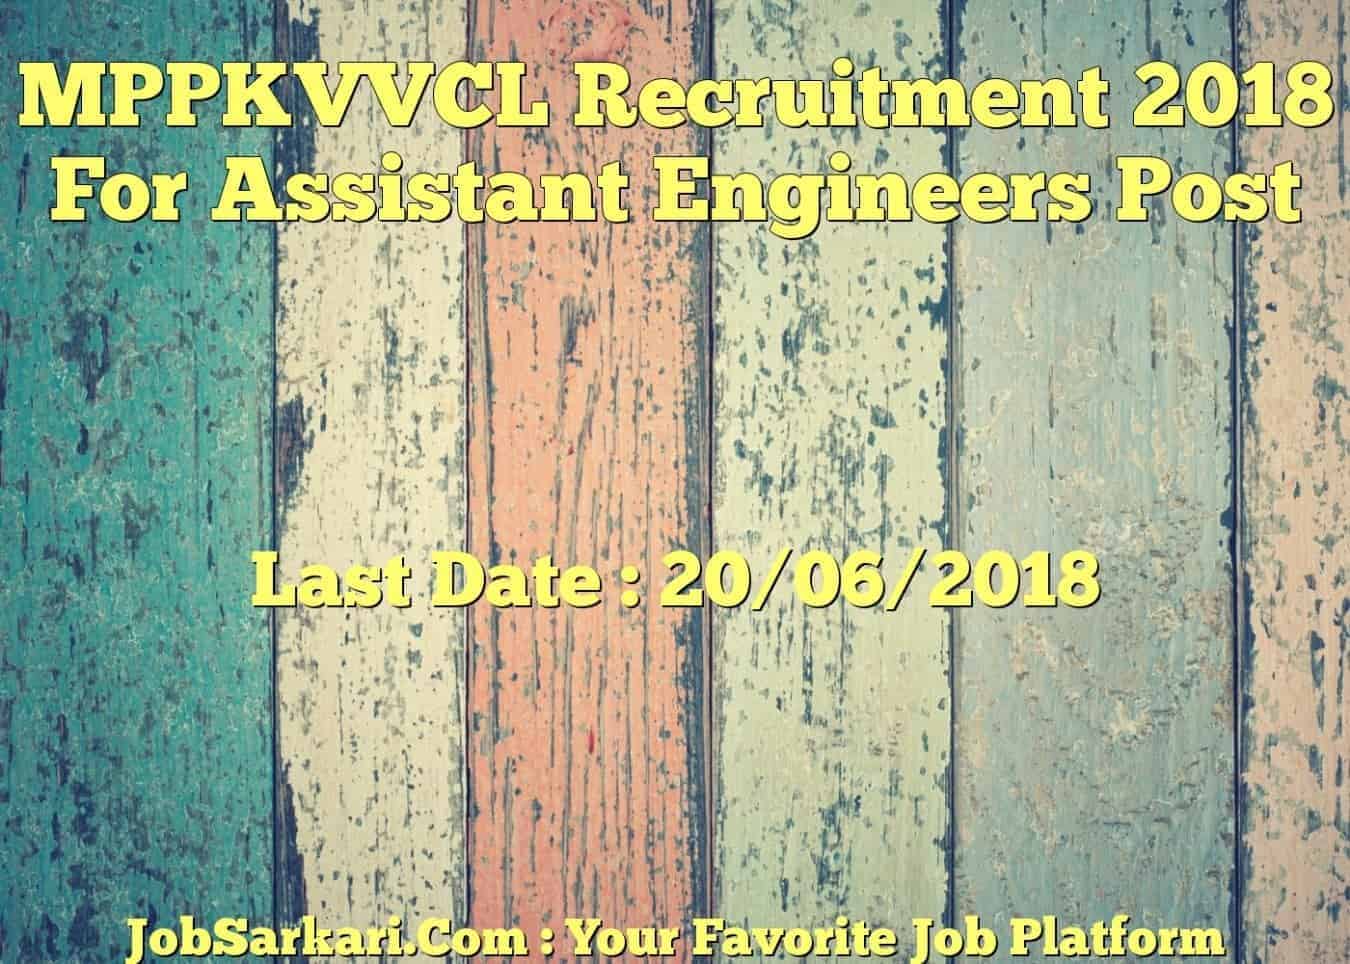 MPPKVVCL Recruitment 2018 For Assistant Engineers Post